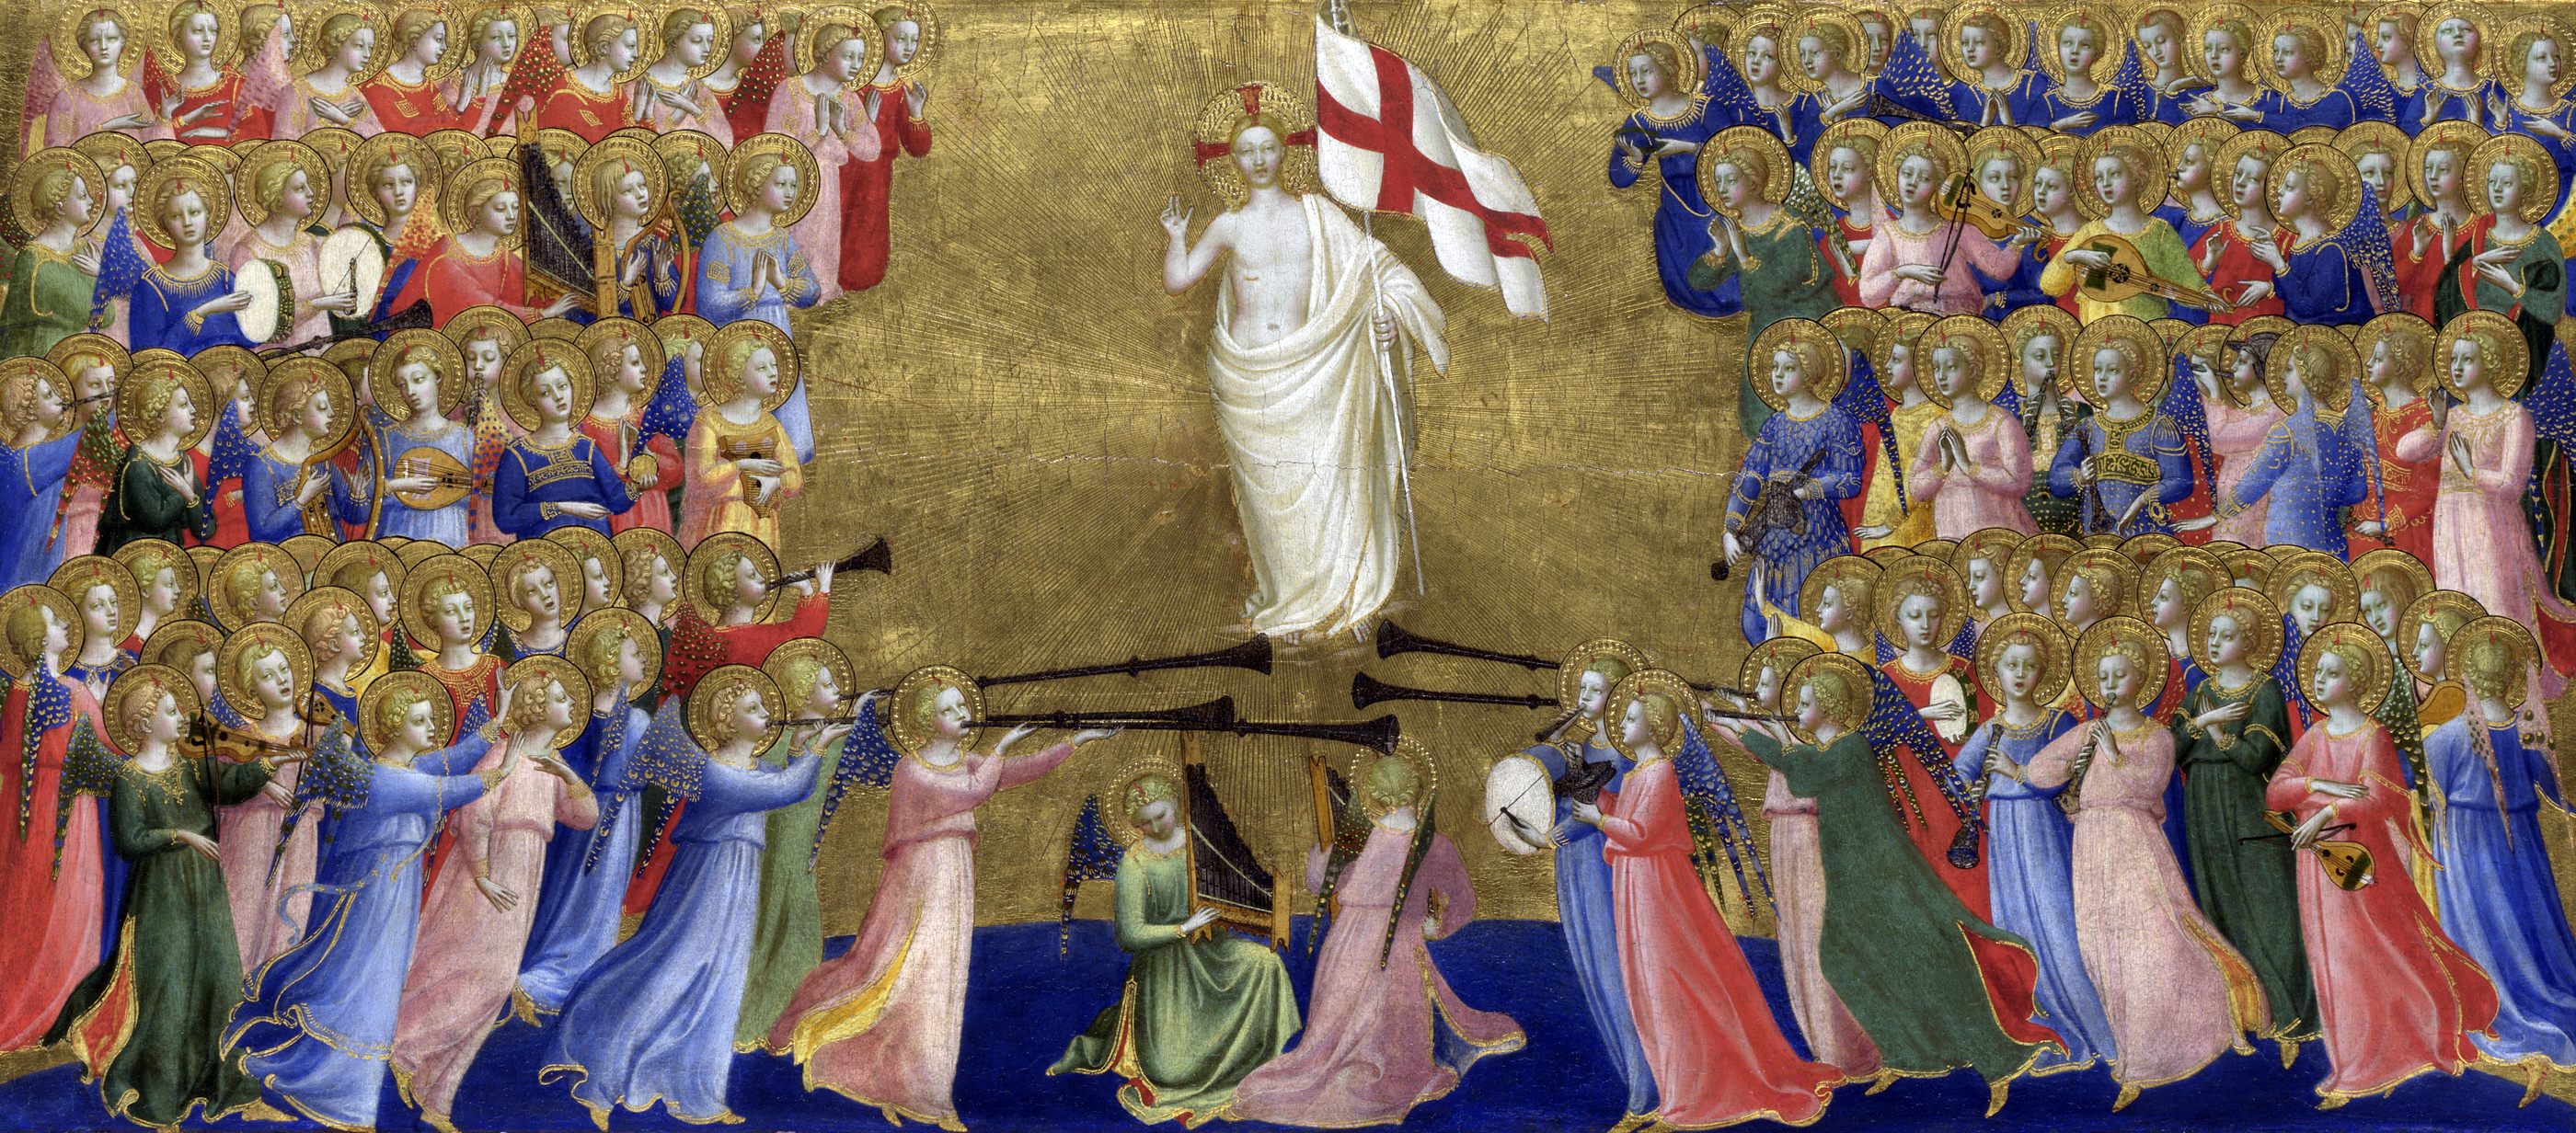 Christ Glorified in the Court of Heaven about 1423-4, Probably by Fra Angelico